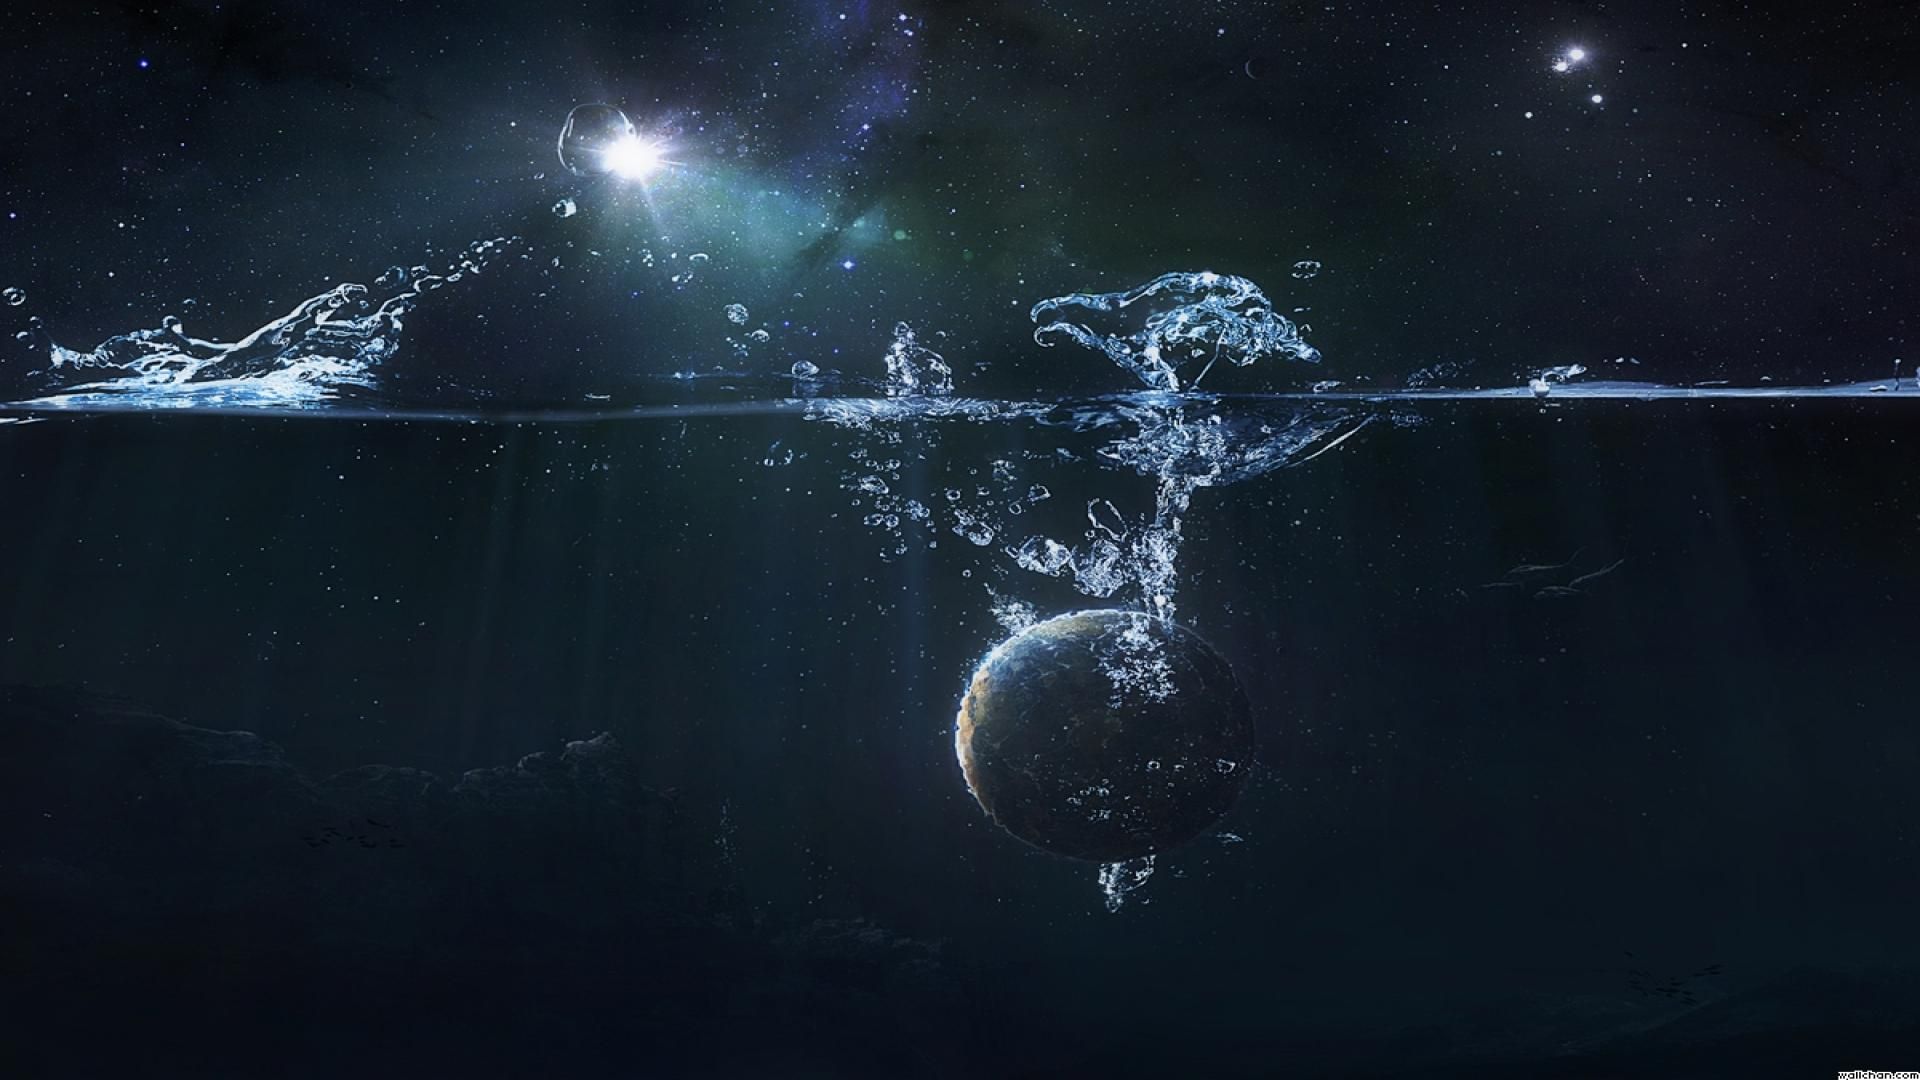 water / Earth abstract space - Space Wallpaper (33309156) - fanpop